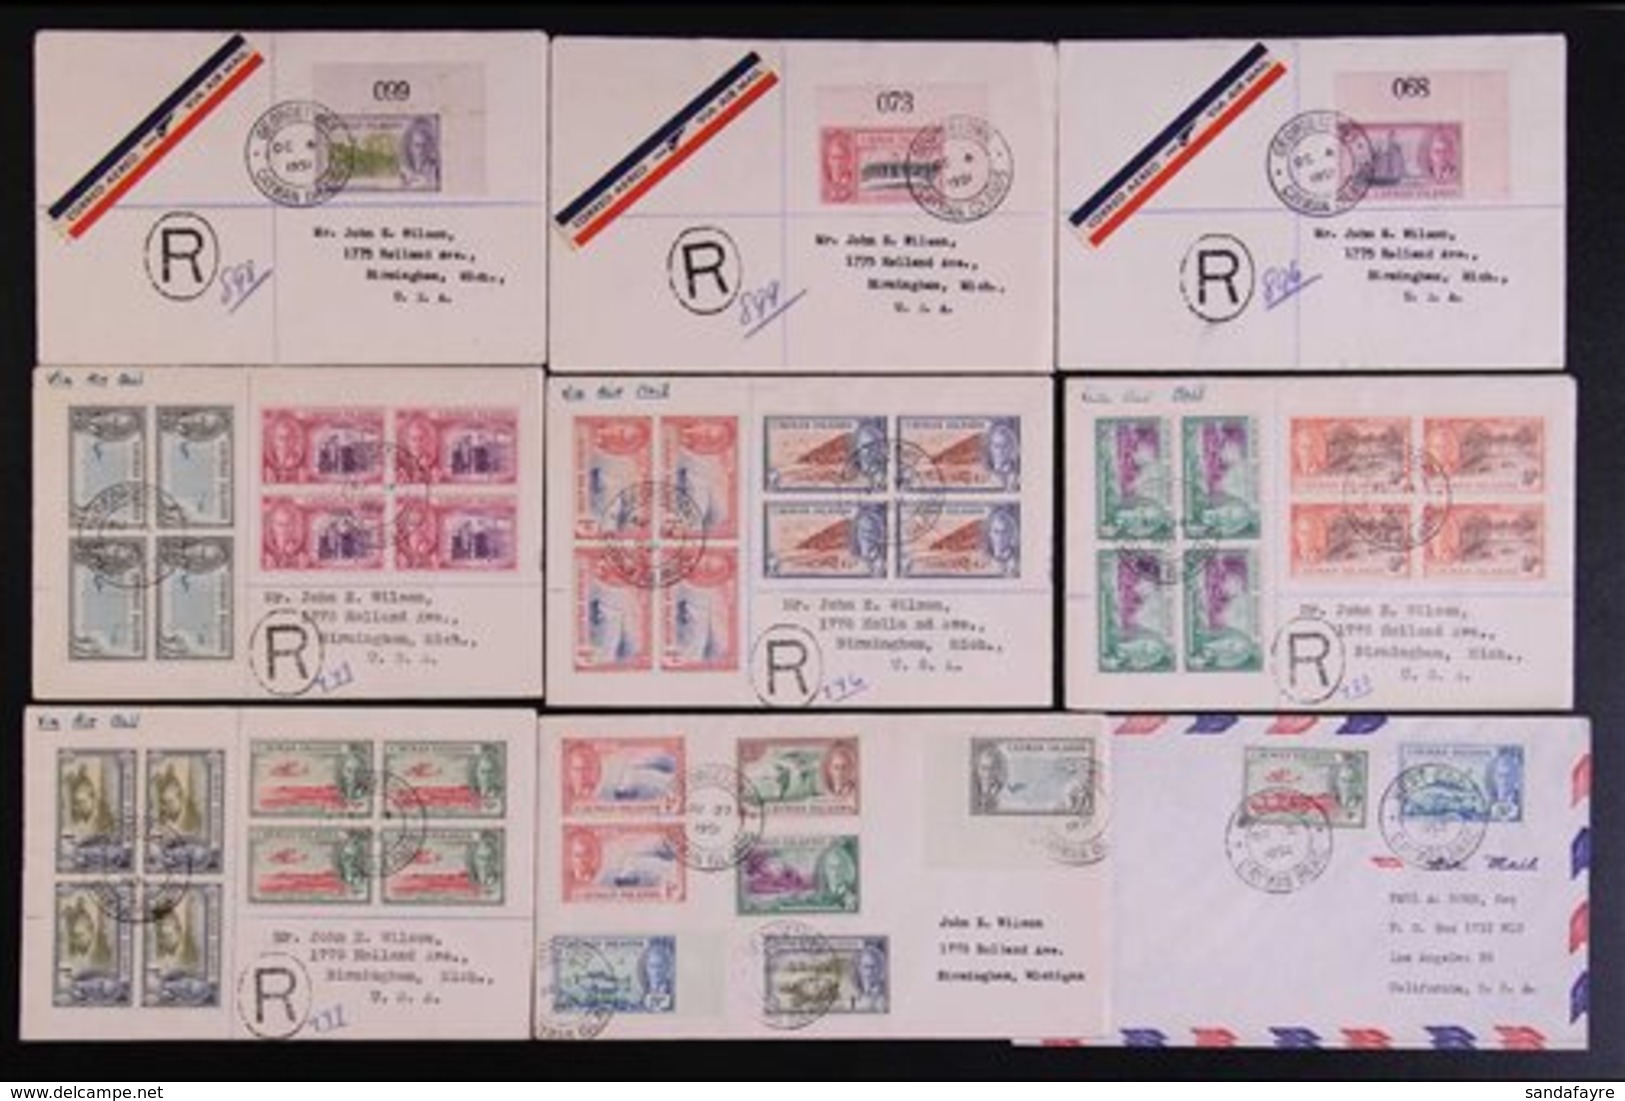 \Y 1950 - 1951 GEO VI COVERS\Y Attractive Group Of Covers, Some Registered, Bearing A Range Of 1950 Commemorative Issues - Cayman Islands